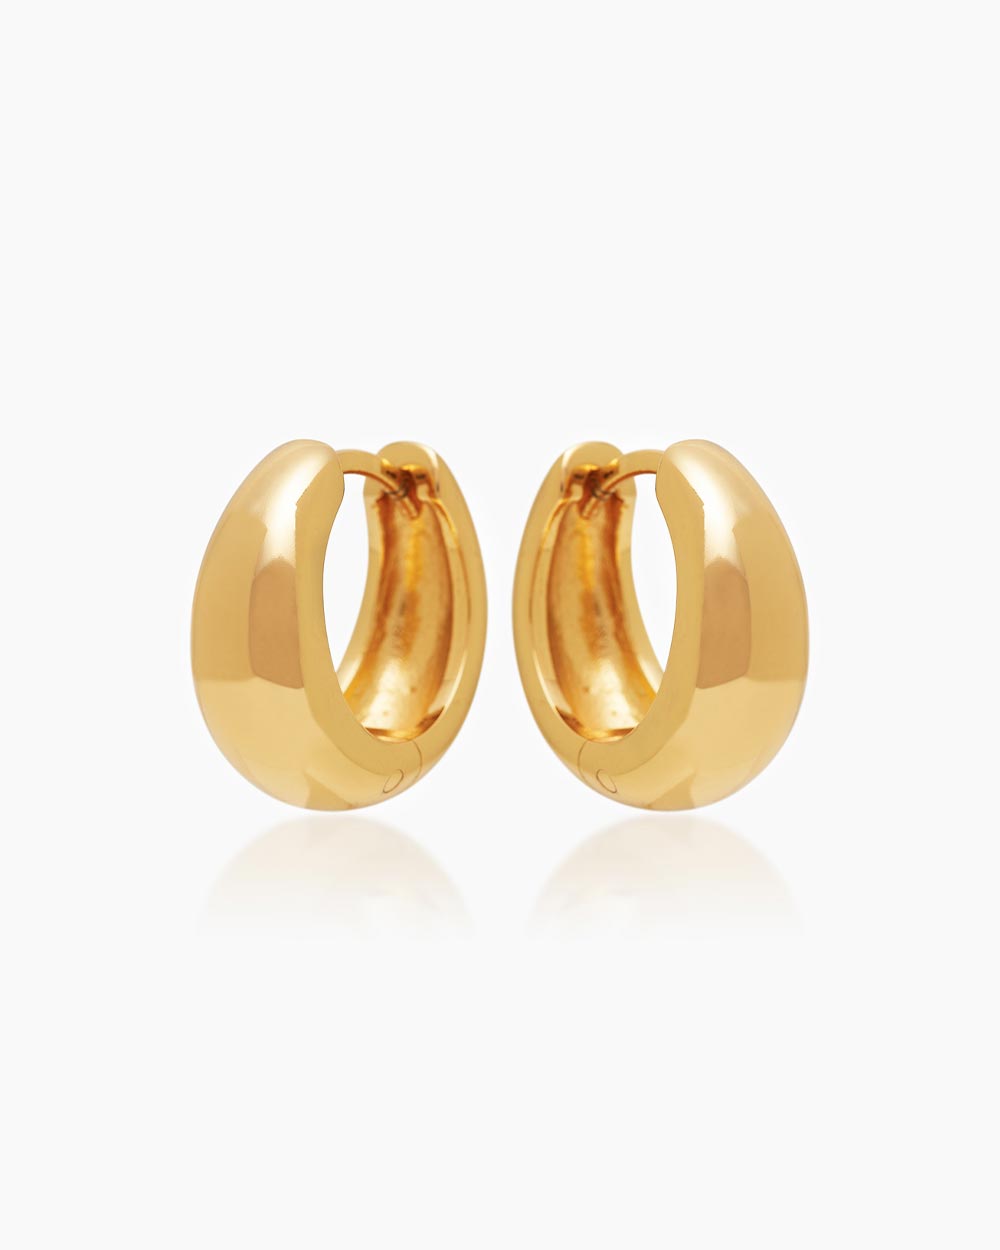 The Barcelona Hoops, a thickset and striking gold earring ideal for everyday wear